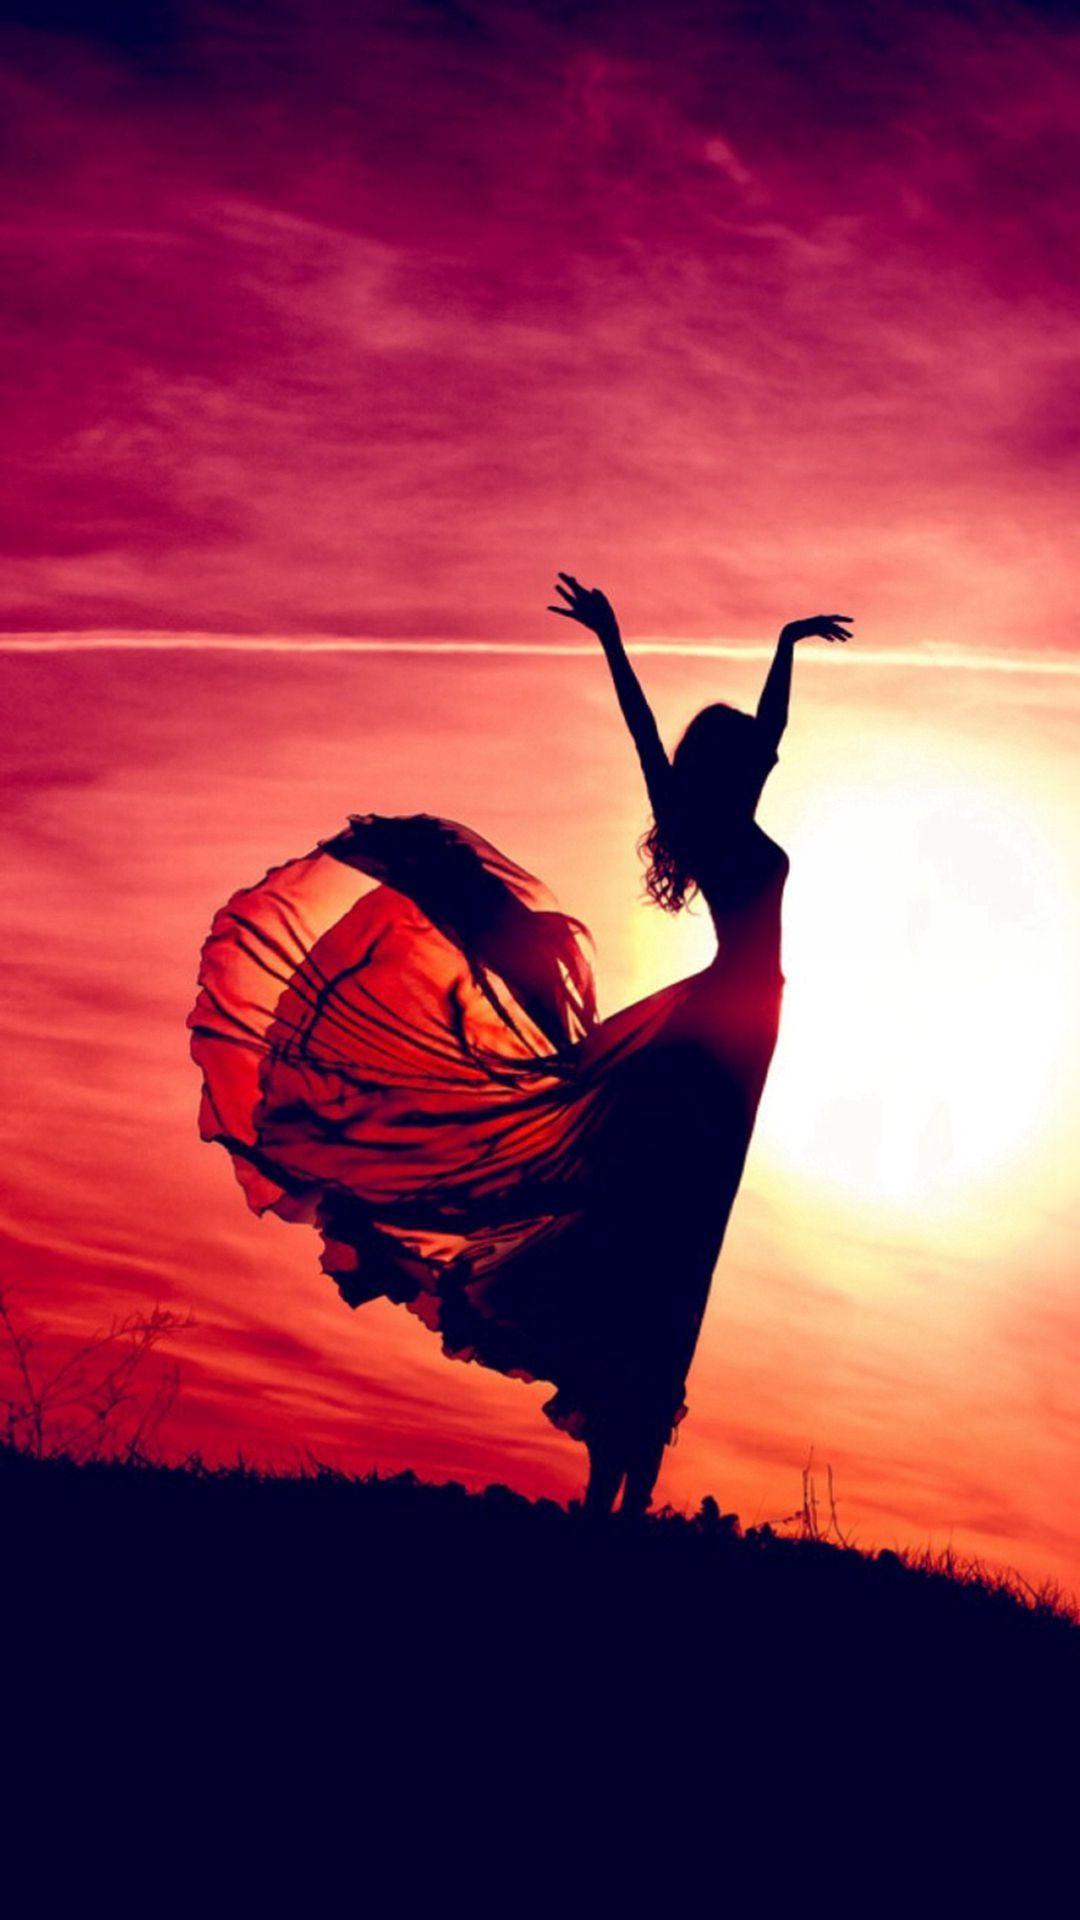 Dancing Girl Background Images HD Pictures and Wallpaper For Free Download   Pngtree